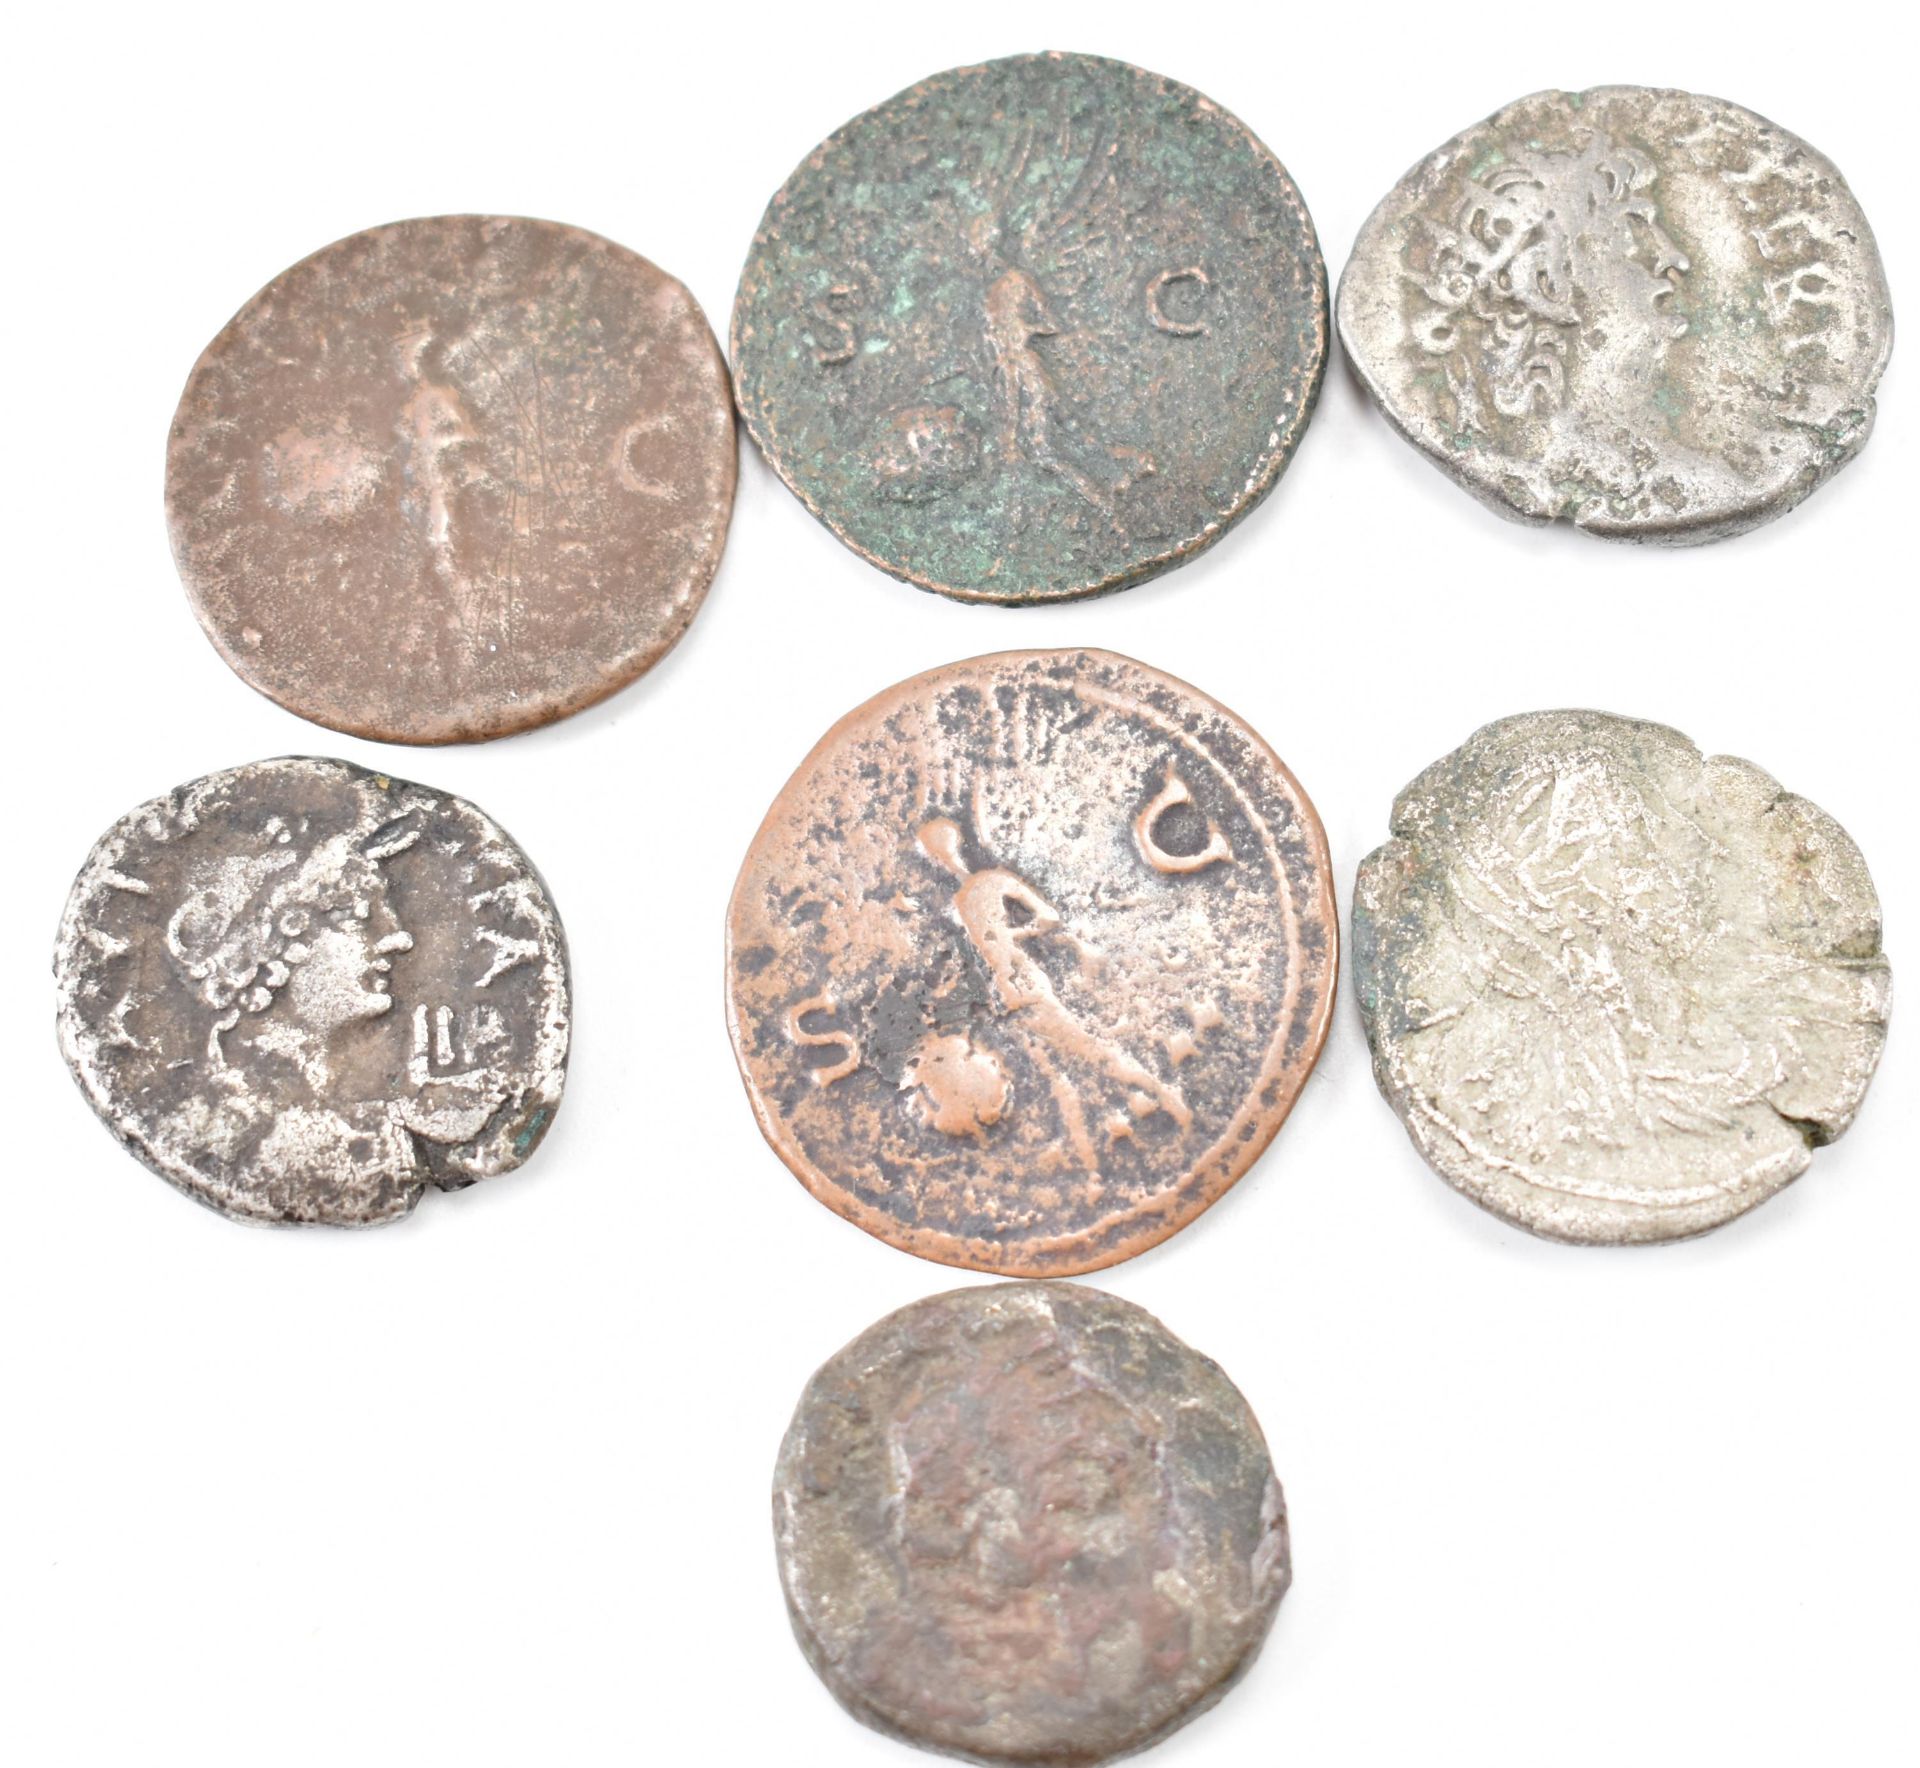 COLLECTION OF ROMAN IMPERIAL COINS FROM THE REIGN OF NERO - Image 4 of 4